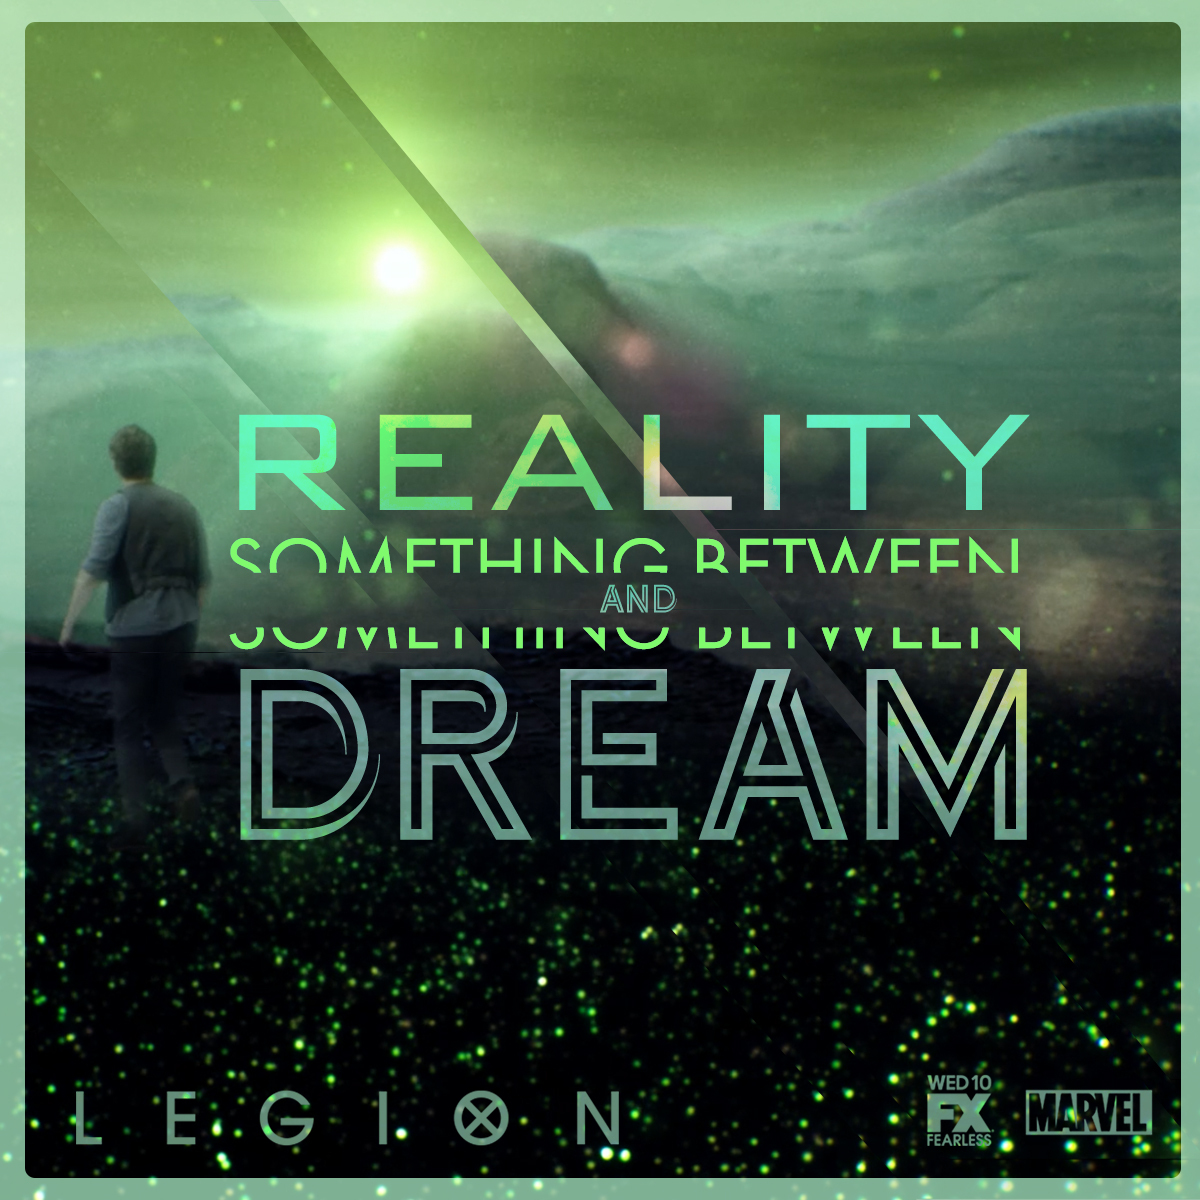 Dreams of reality. Legion FX. A Dream in reality.